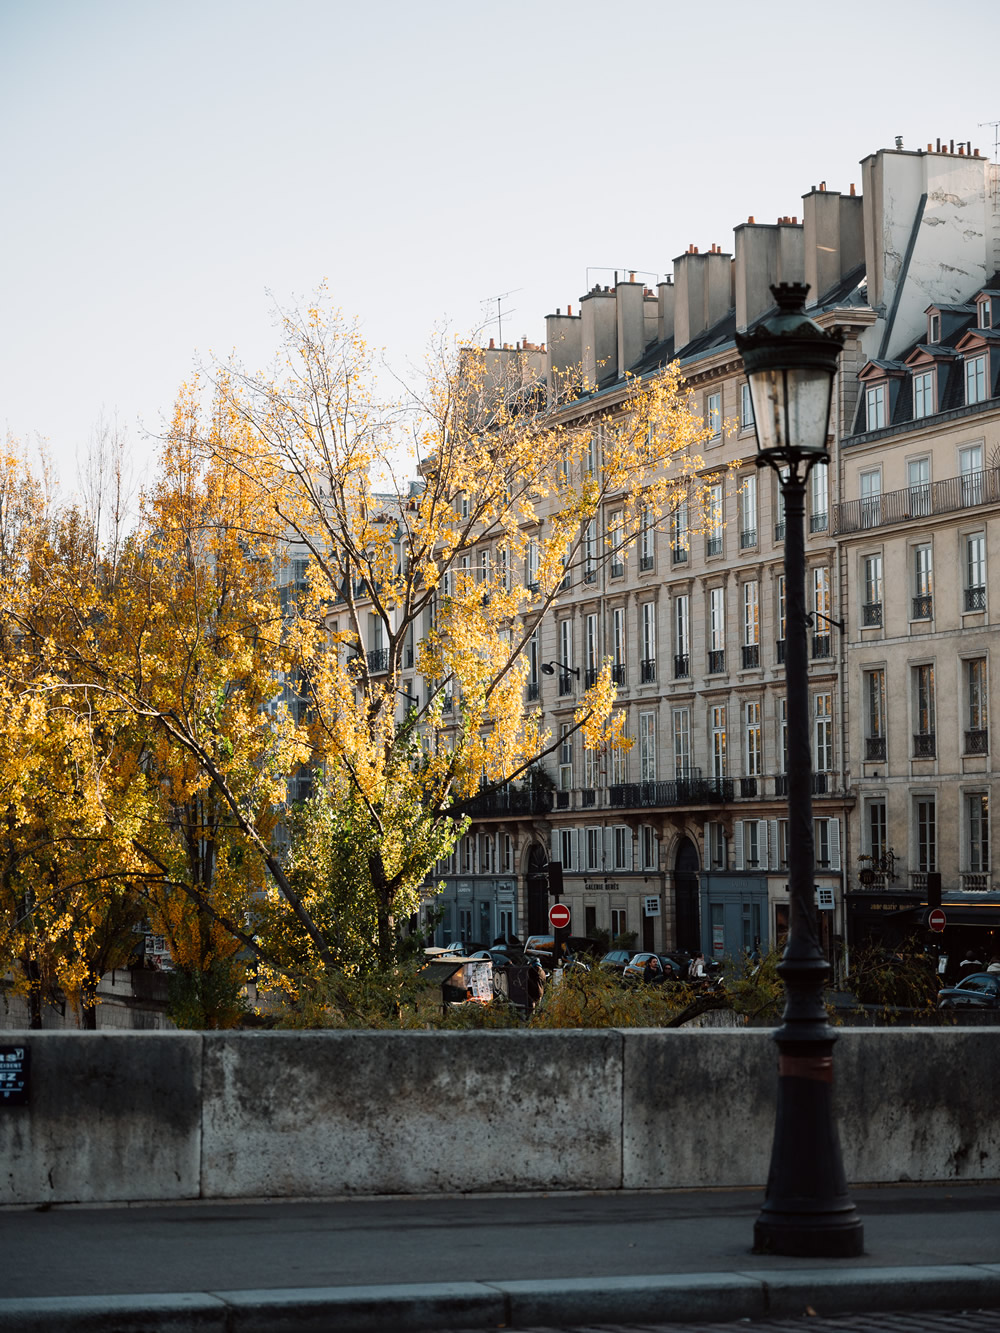 Paris in autumn is awesome